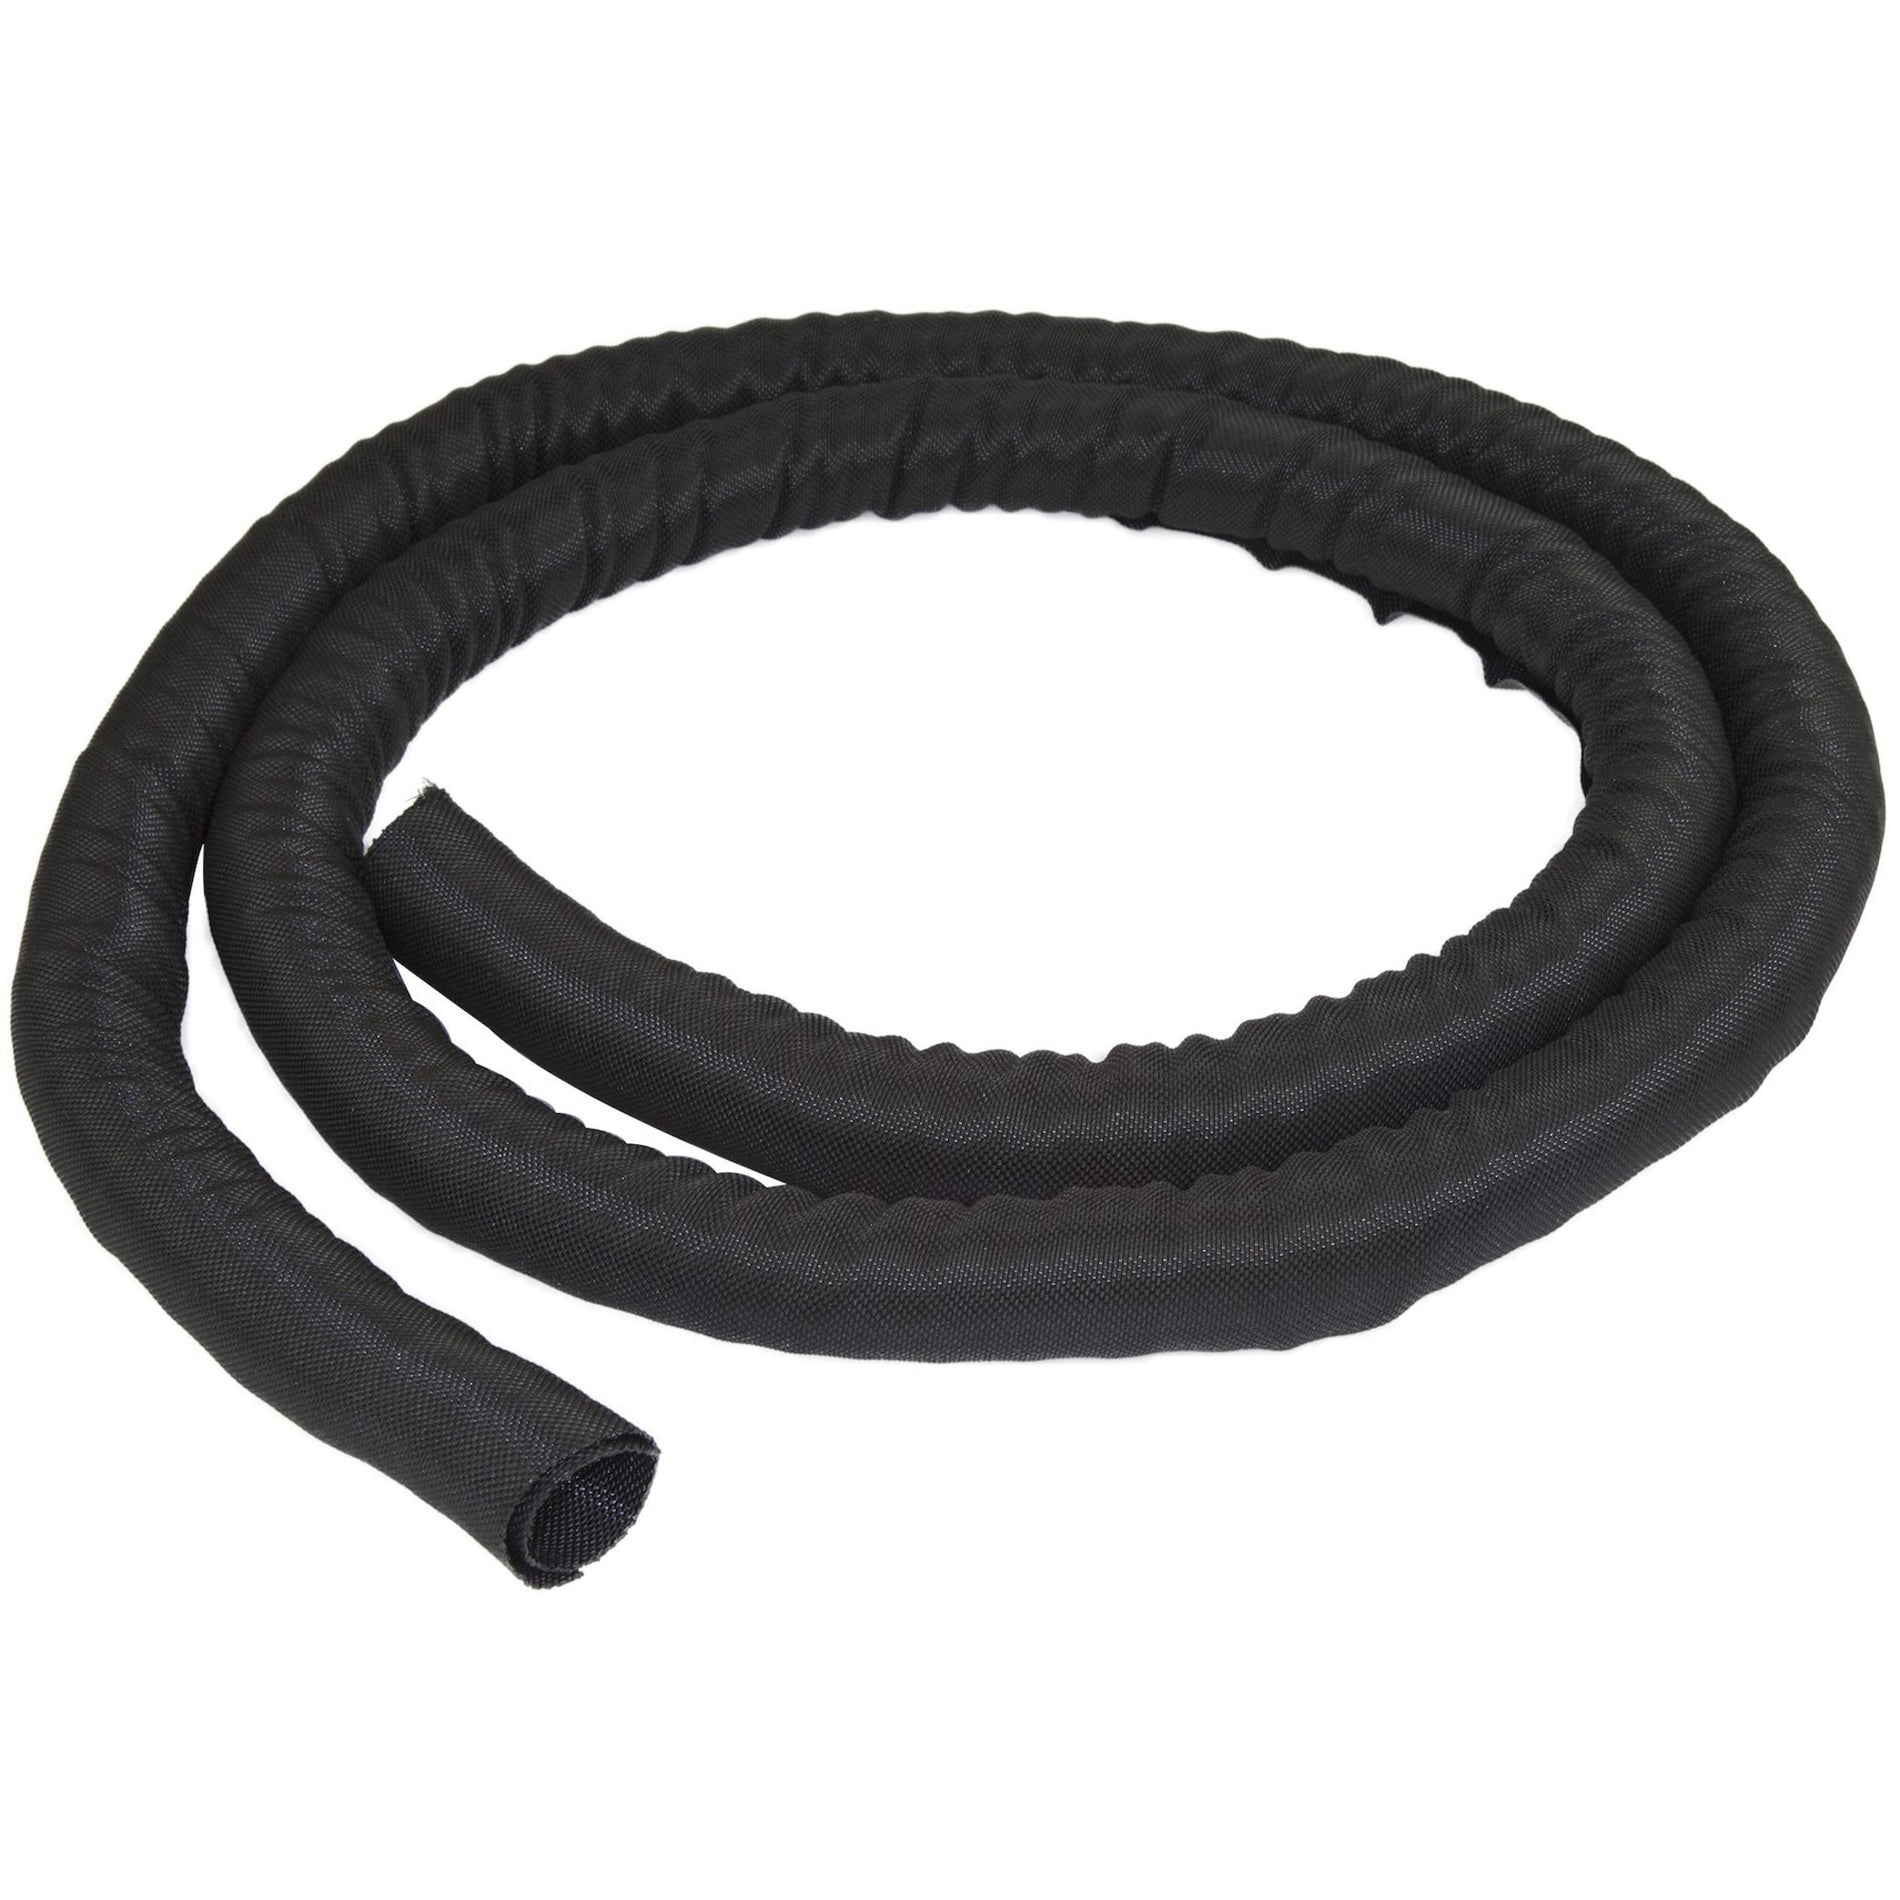 StarTech.com WKSTNCM 2 m Cable-Management Sleeve, Flexible Cable Cover, Trimmable Fabric Cord Hider, Cord Management, Wire Management, Wire Hider